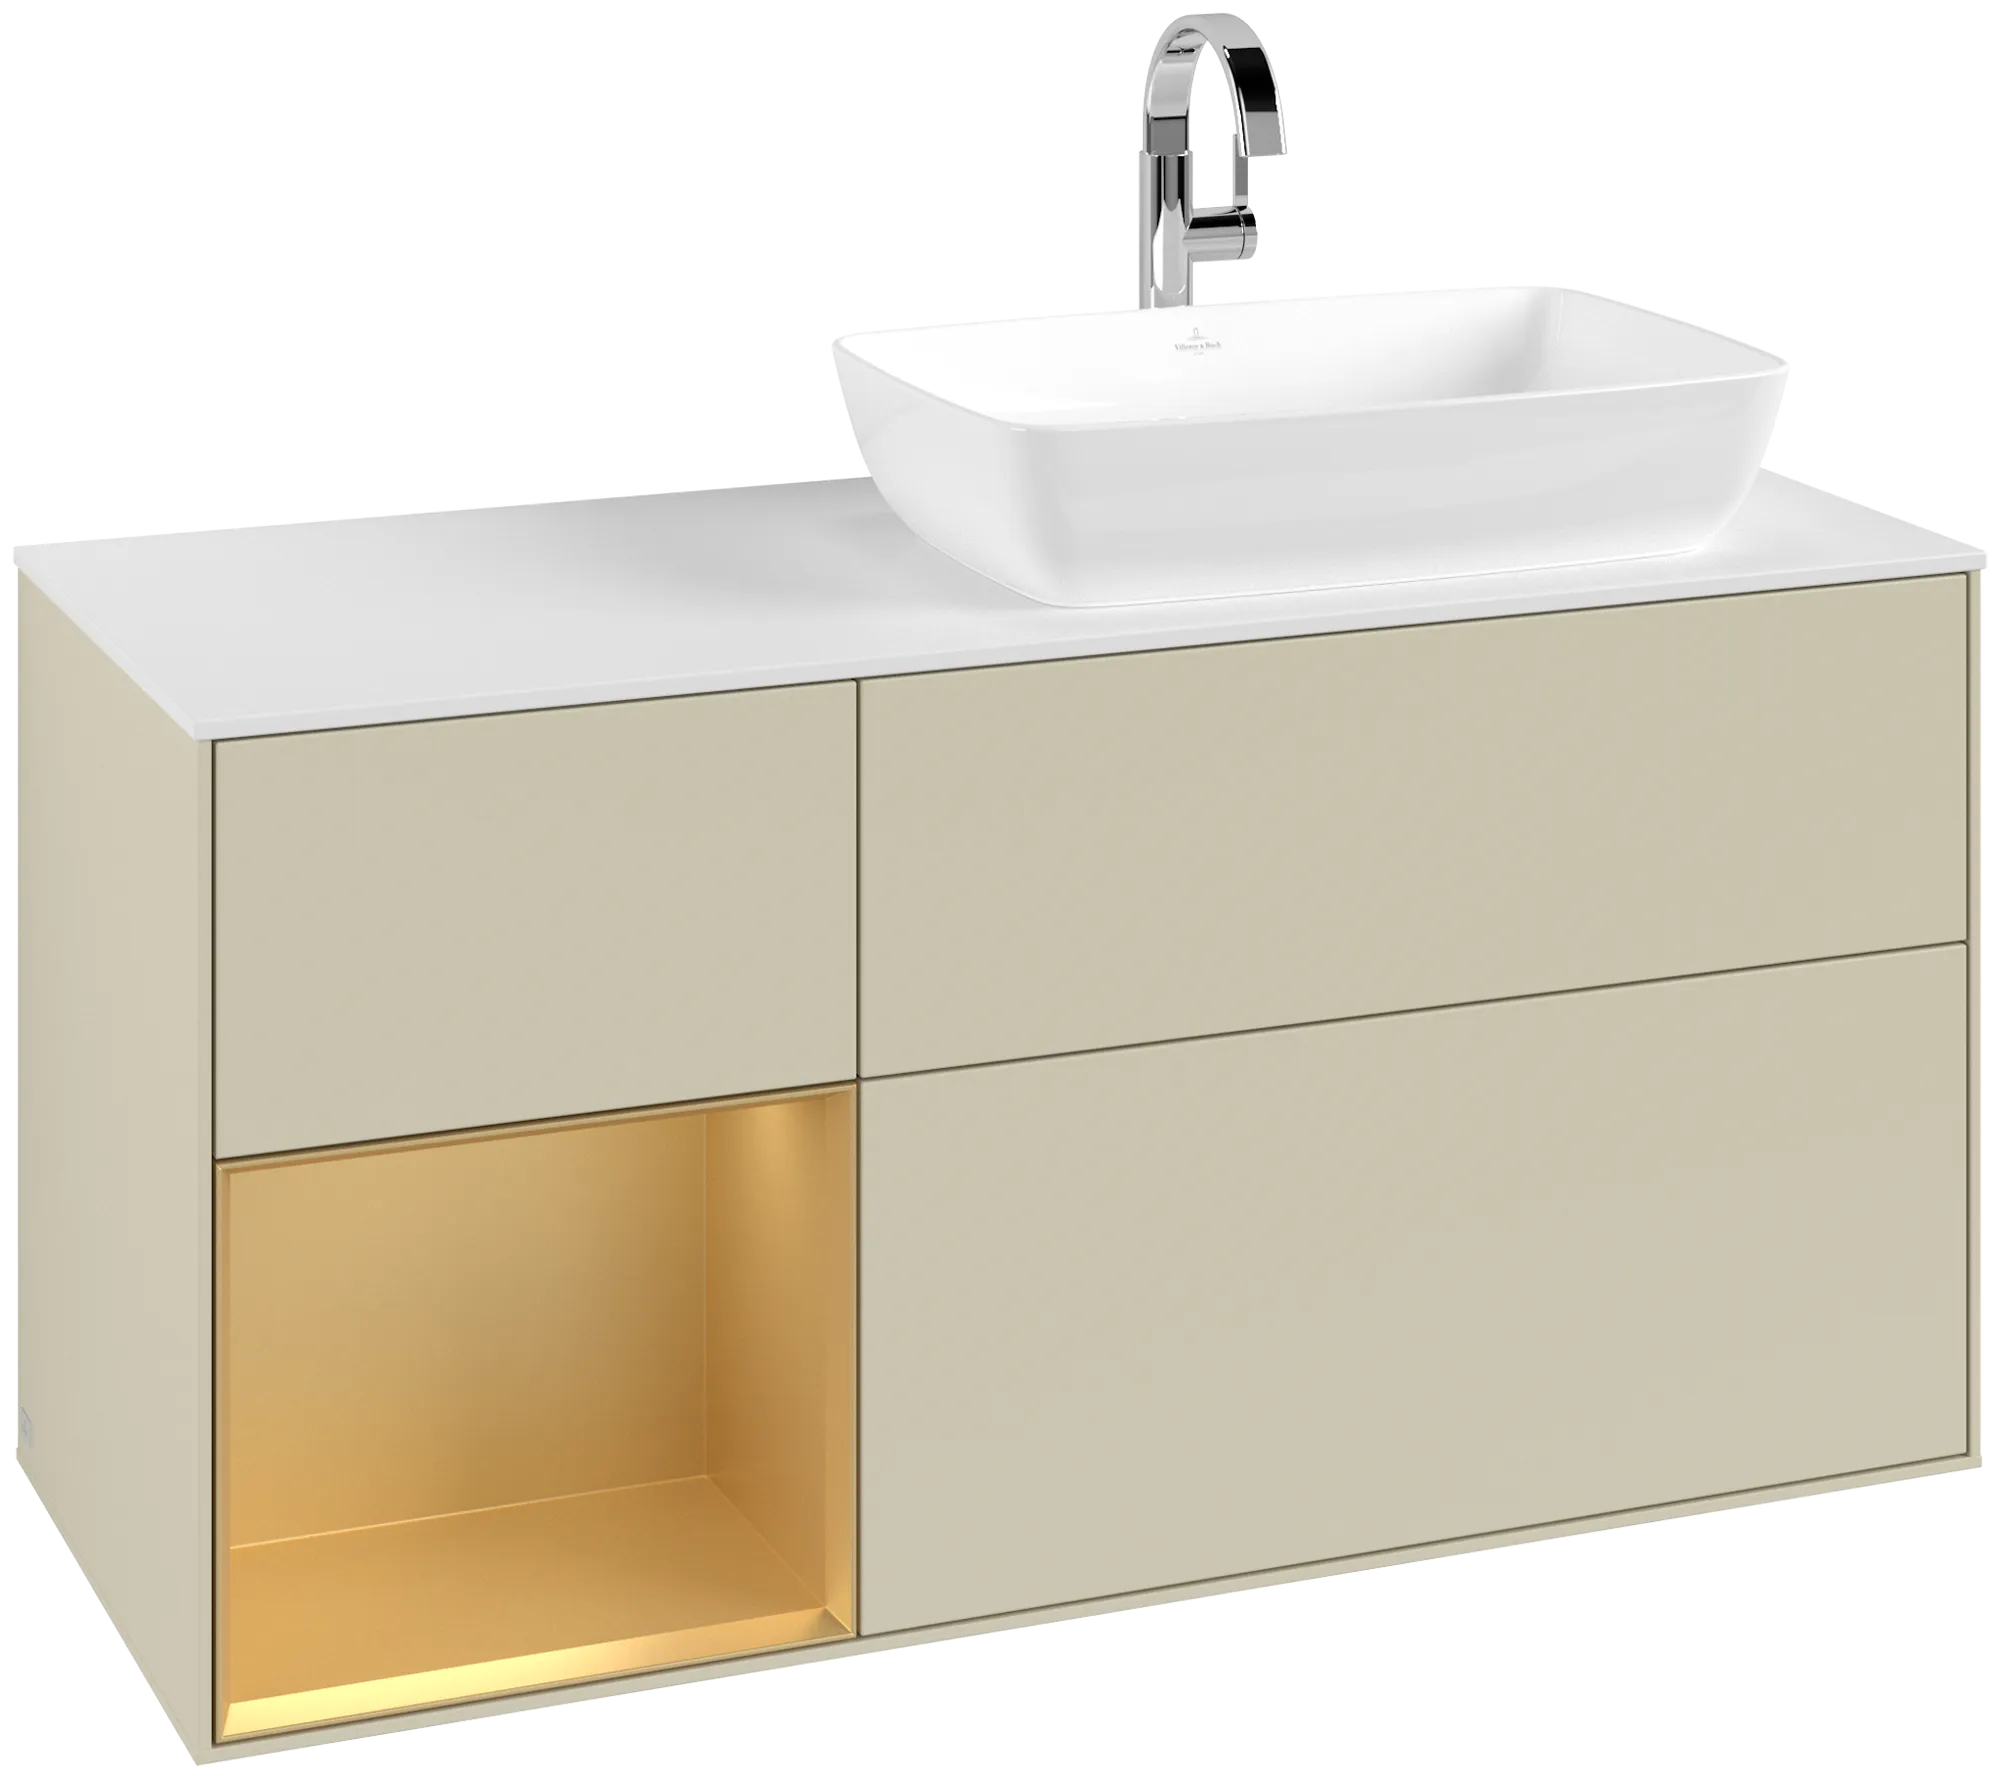 Picture of VILLEROY BOCH Finion Vanity unit, with lighting, 3 pull-out compartments, 1200 x 603 x 501 mm, Silk Grey Matt Lacquer / Gold Matt Lacquer / Glass White Matt #G801HFHJ